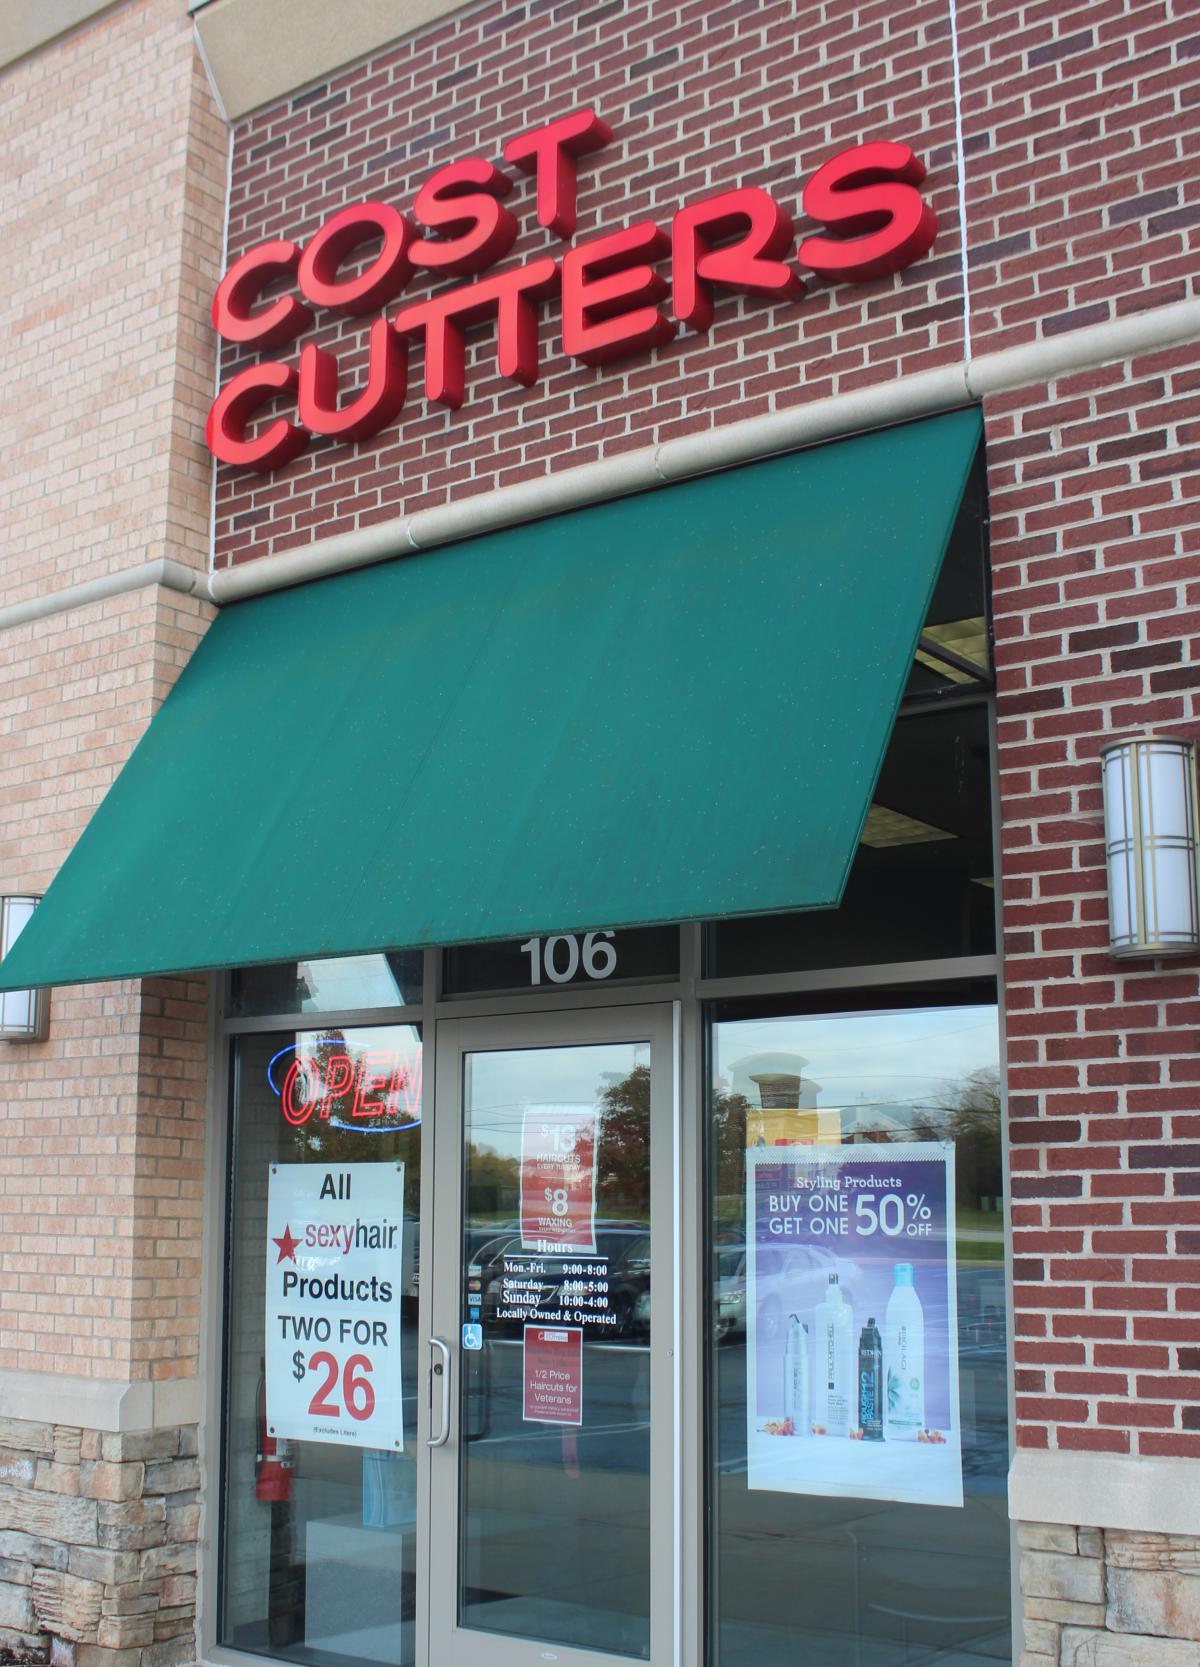 cost of haircut at cost cutters